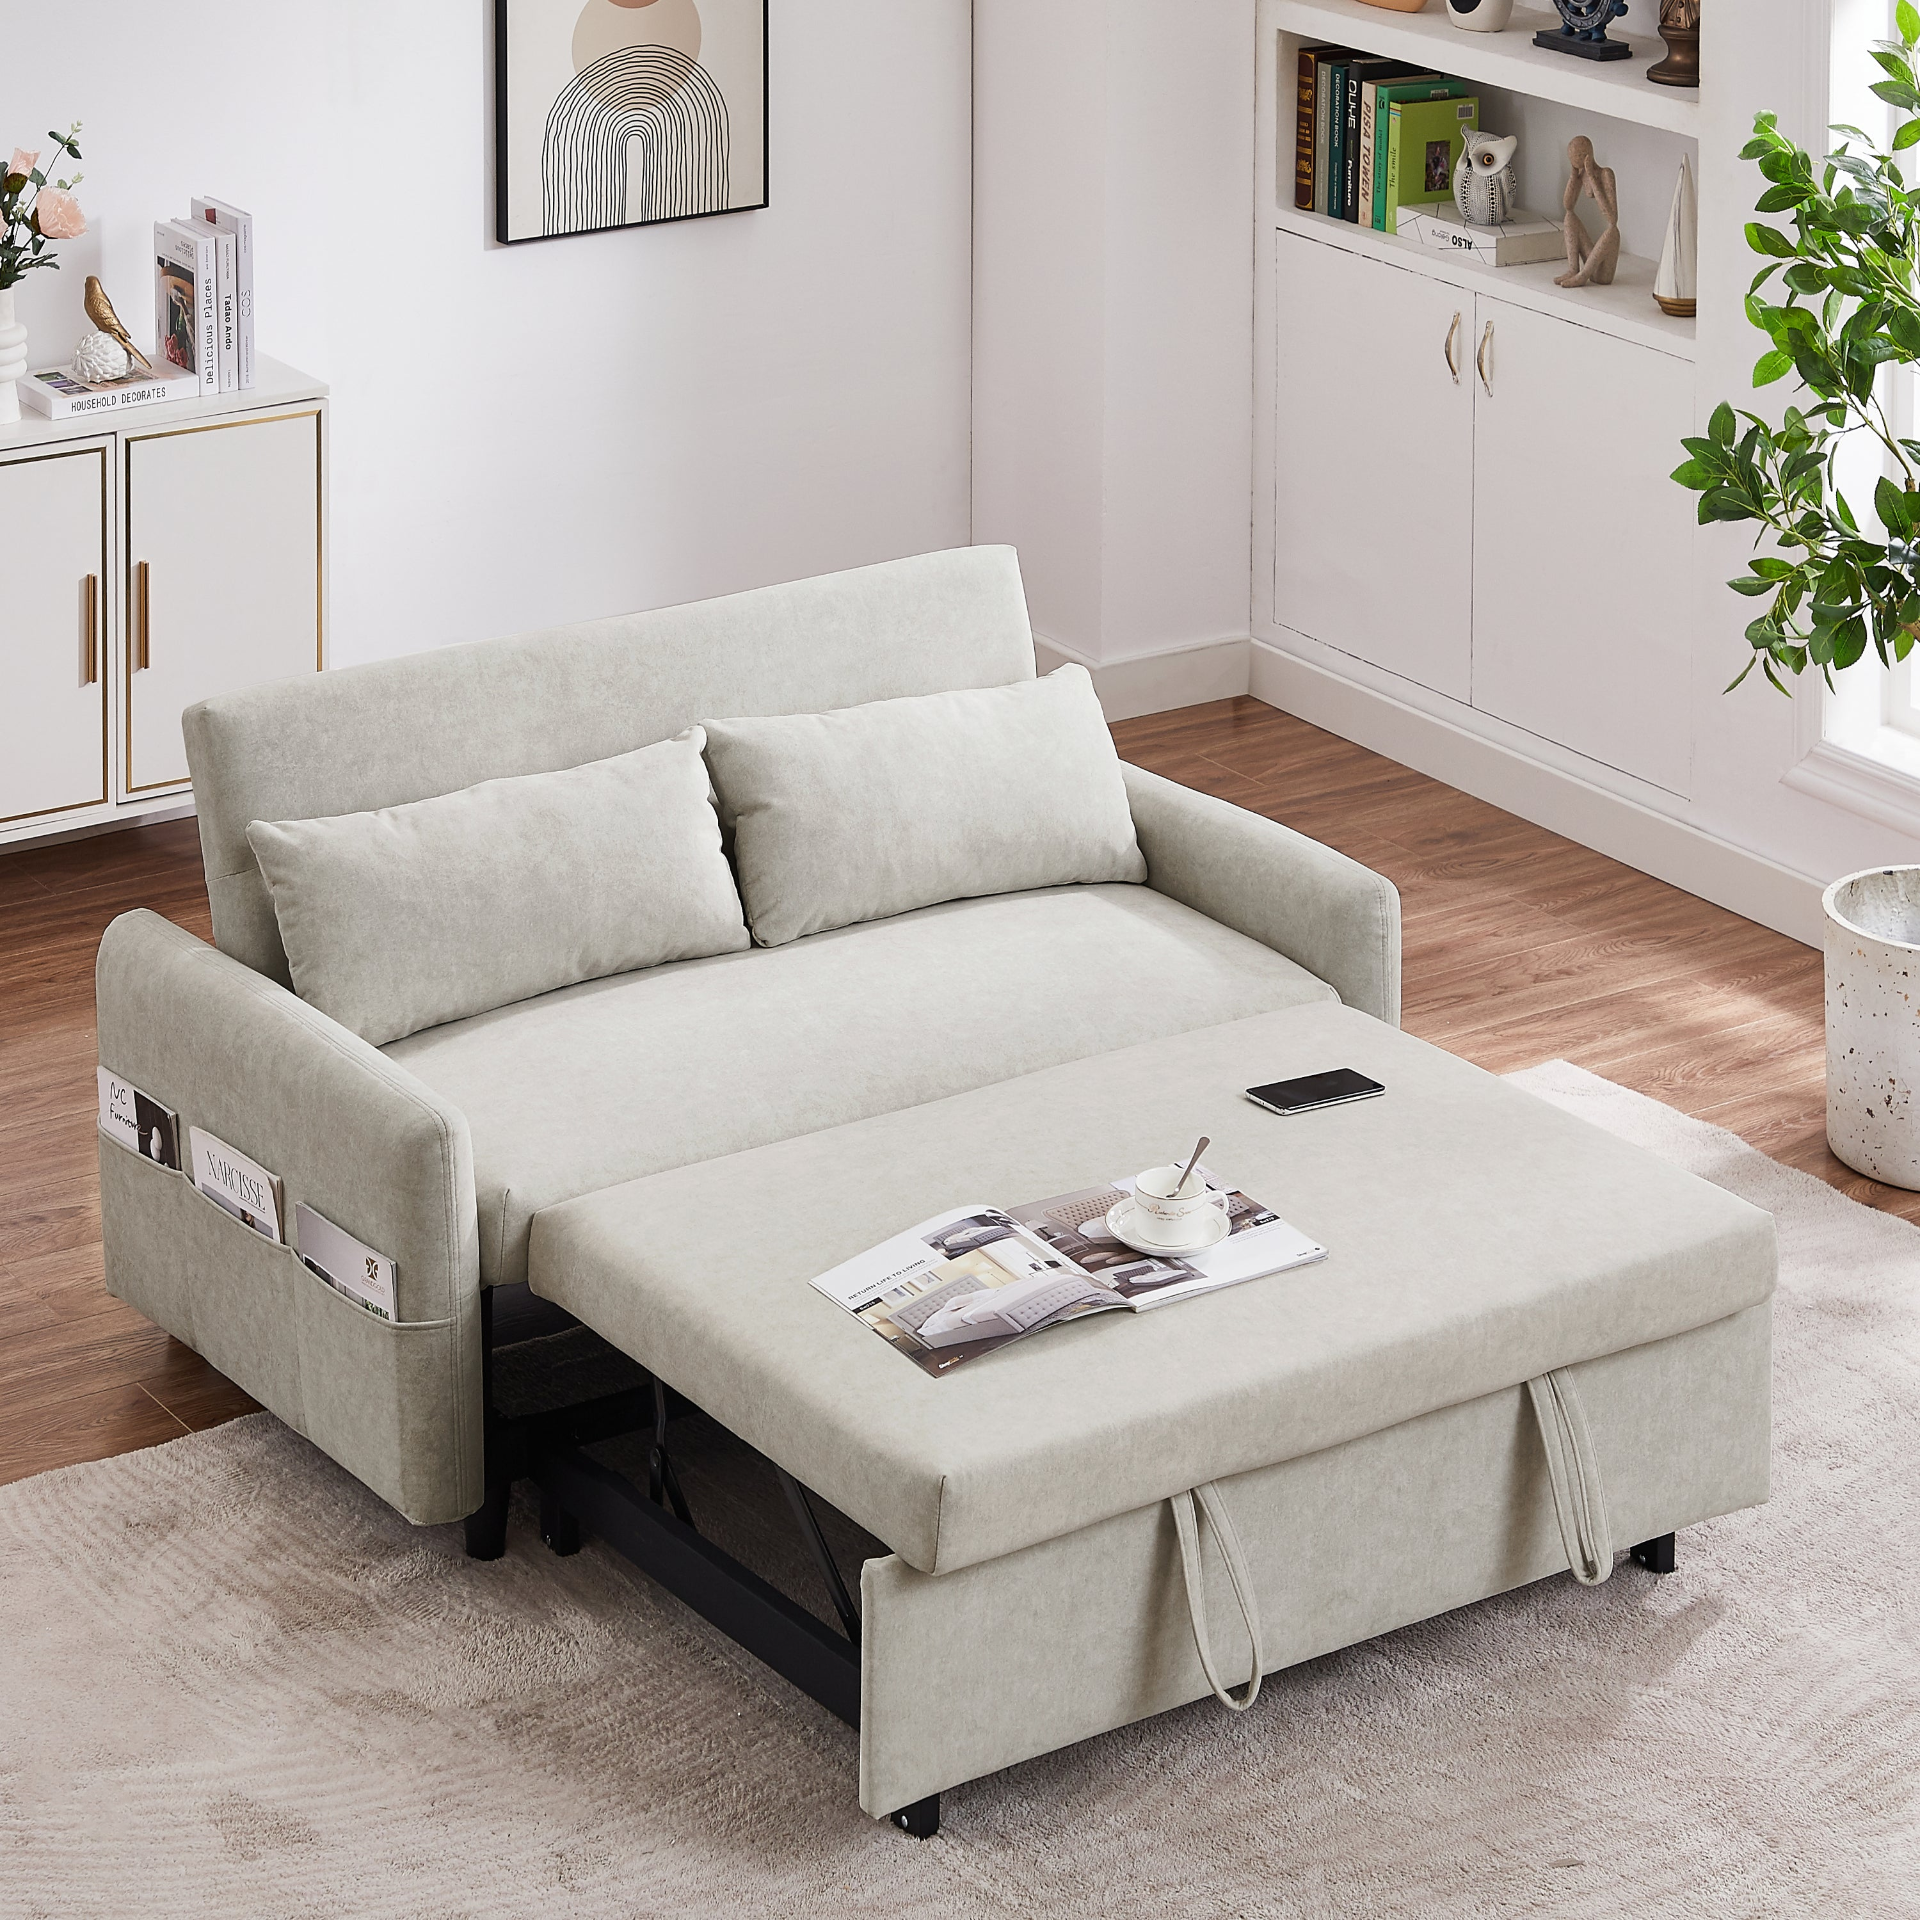 Beige - Urban Chic Loveseat Style Sofa Bed with Adjustable Backrest and USB Ports (55")